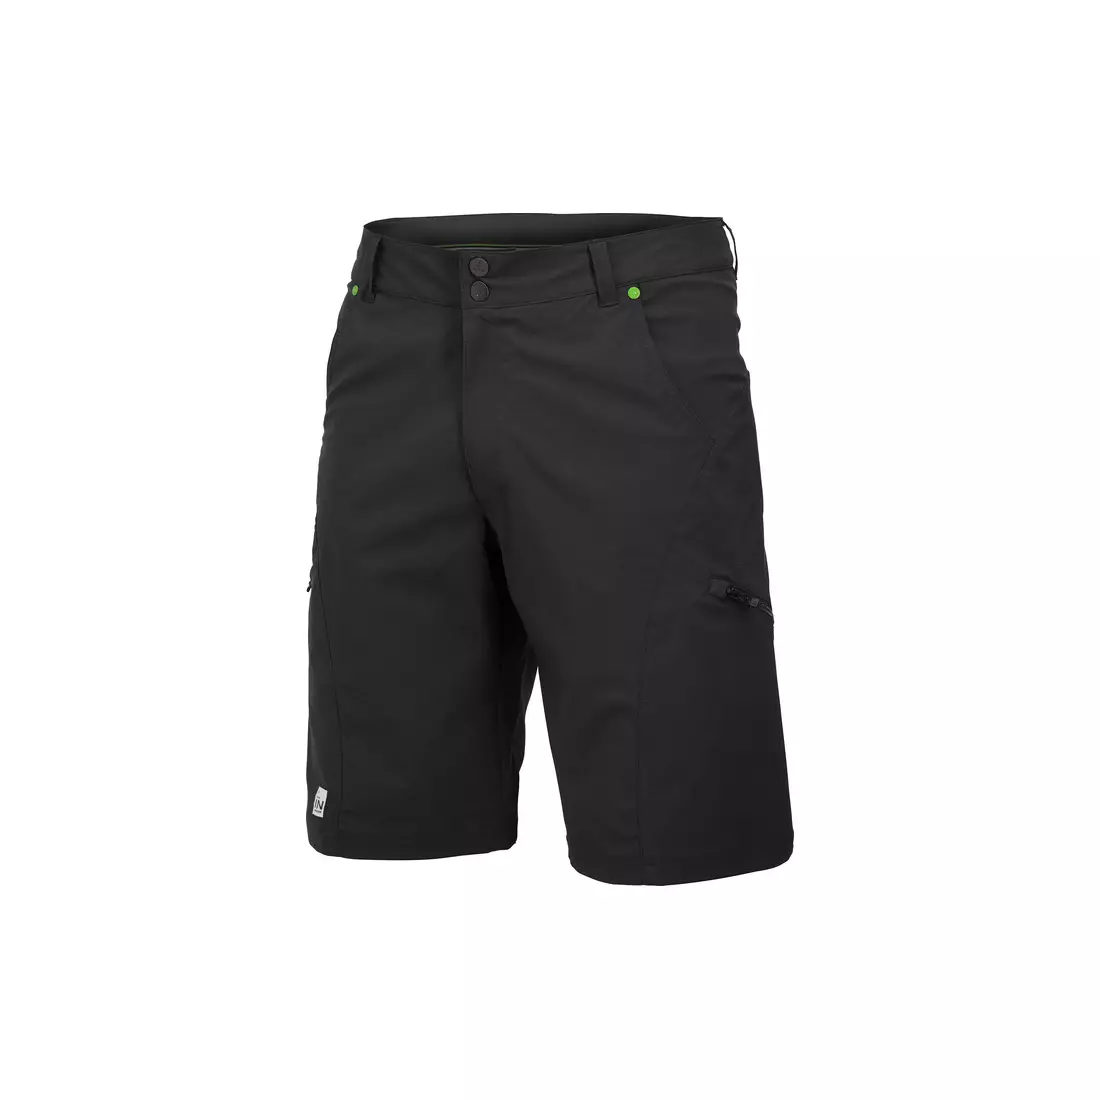 CRAFT 1902646-9999 - men's In-The-Zone shorts, color: Black